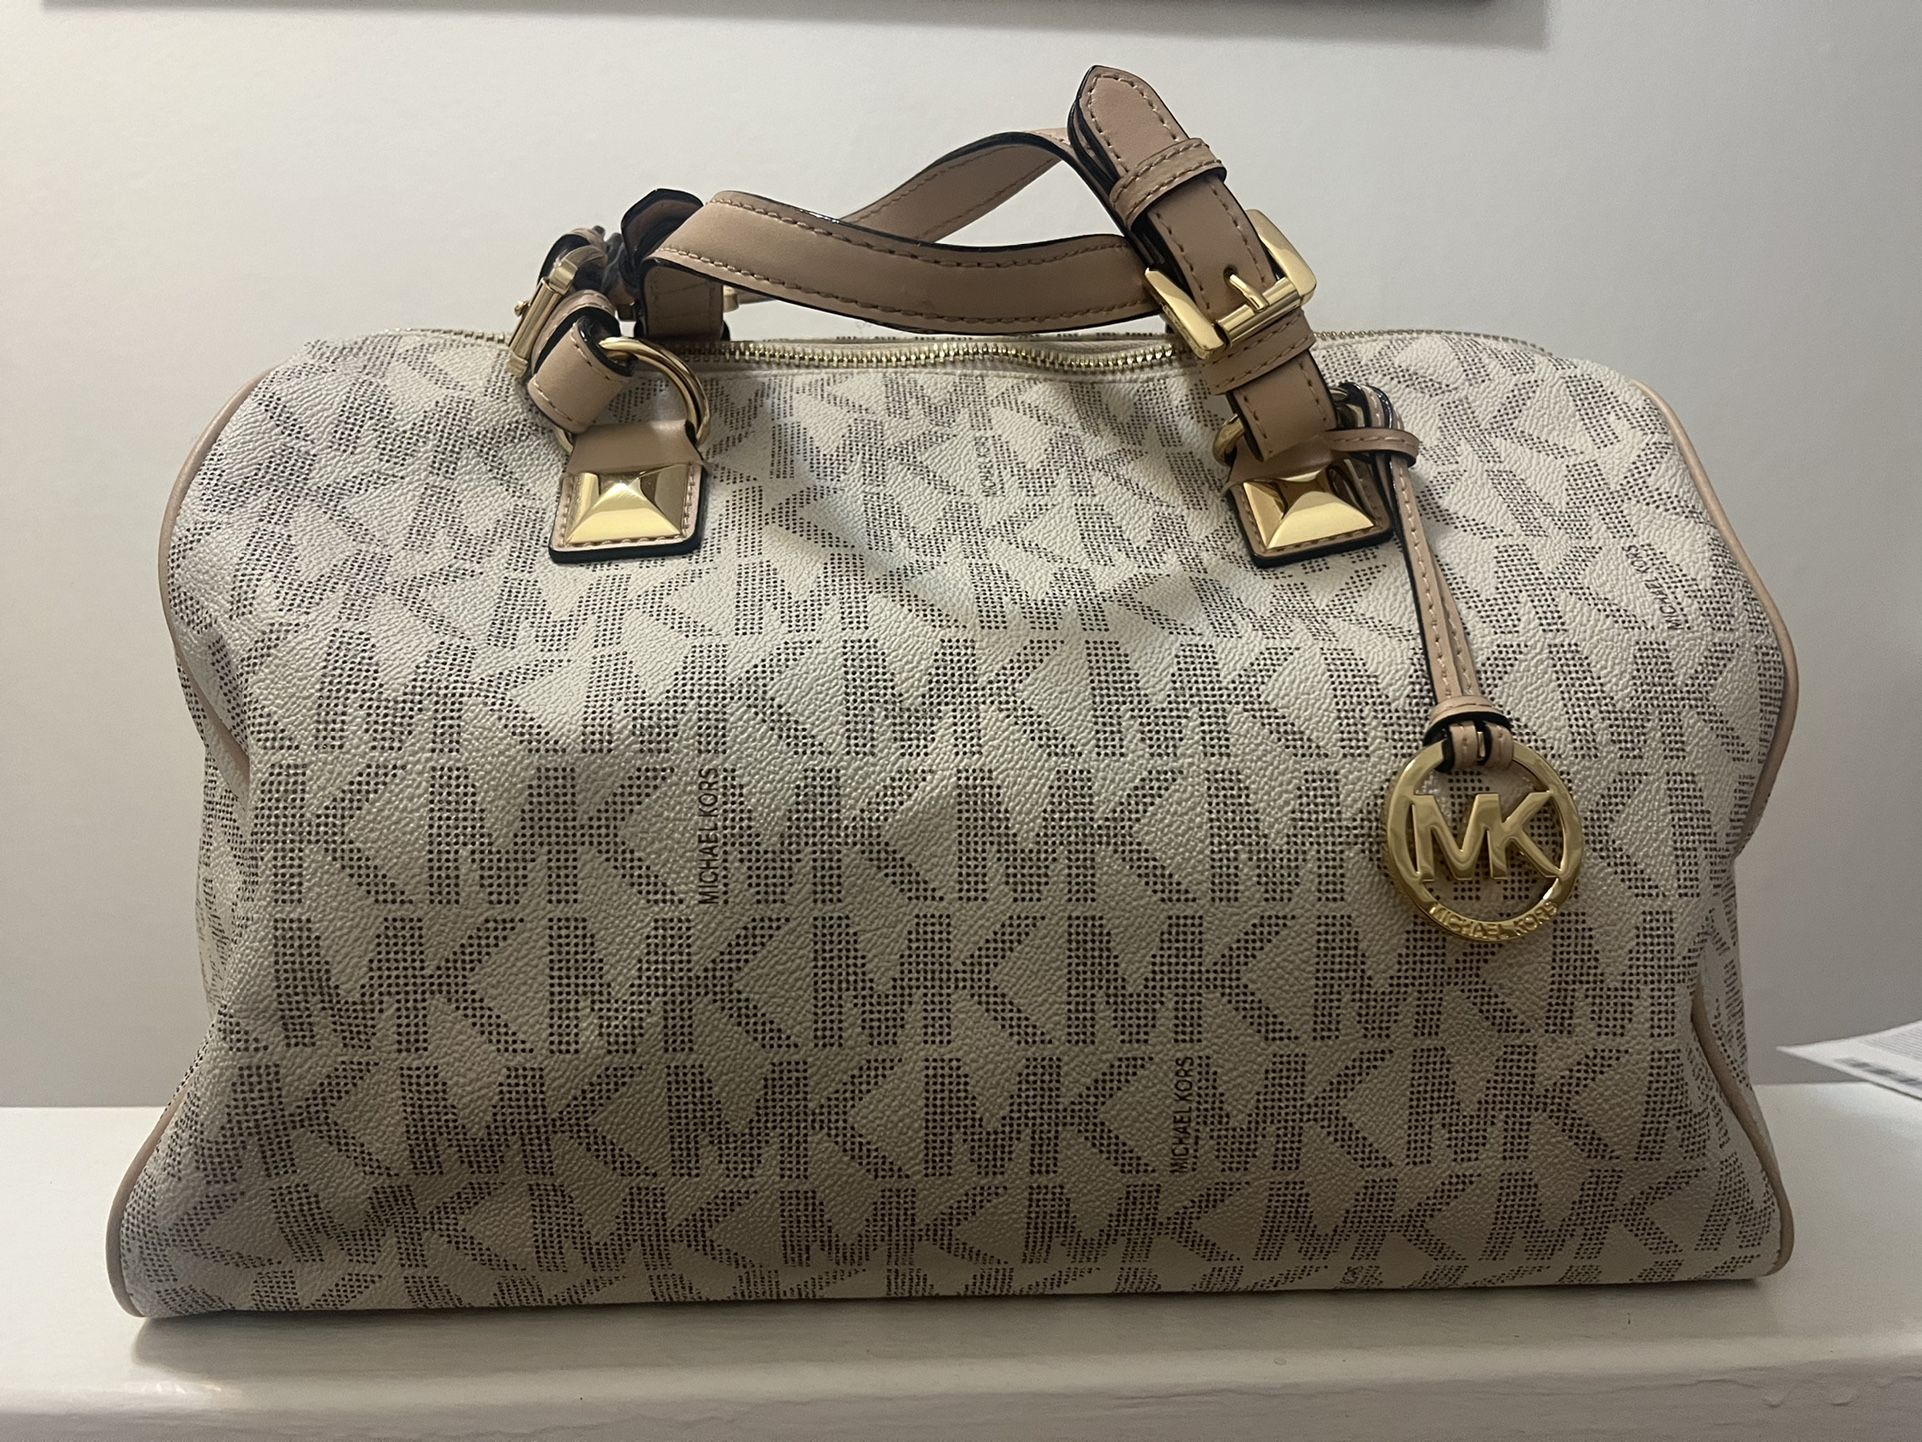 Authentic Michael Kors Large Speedy Bag for Sale in Costa Mesa